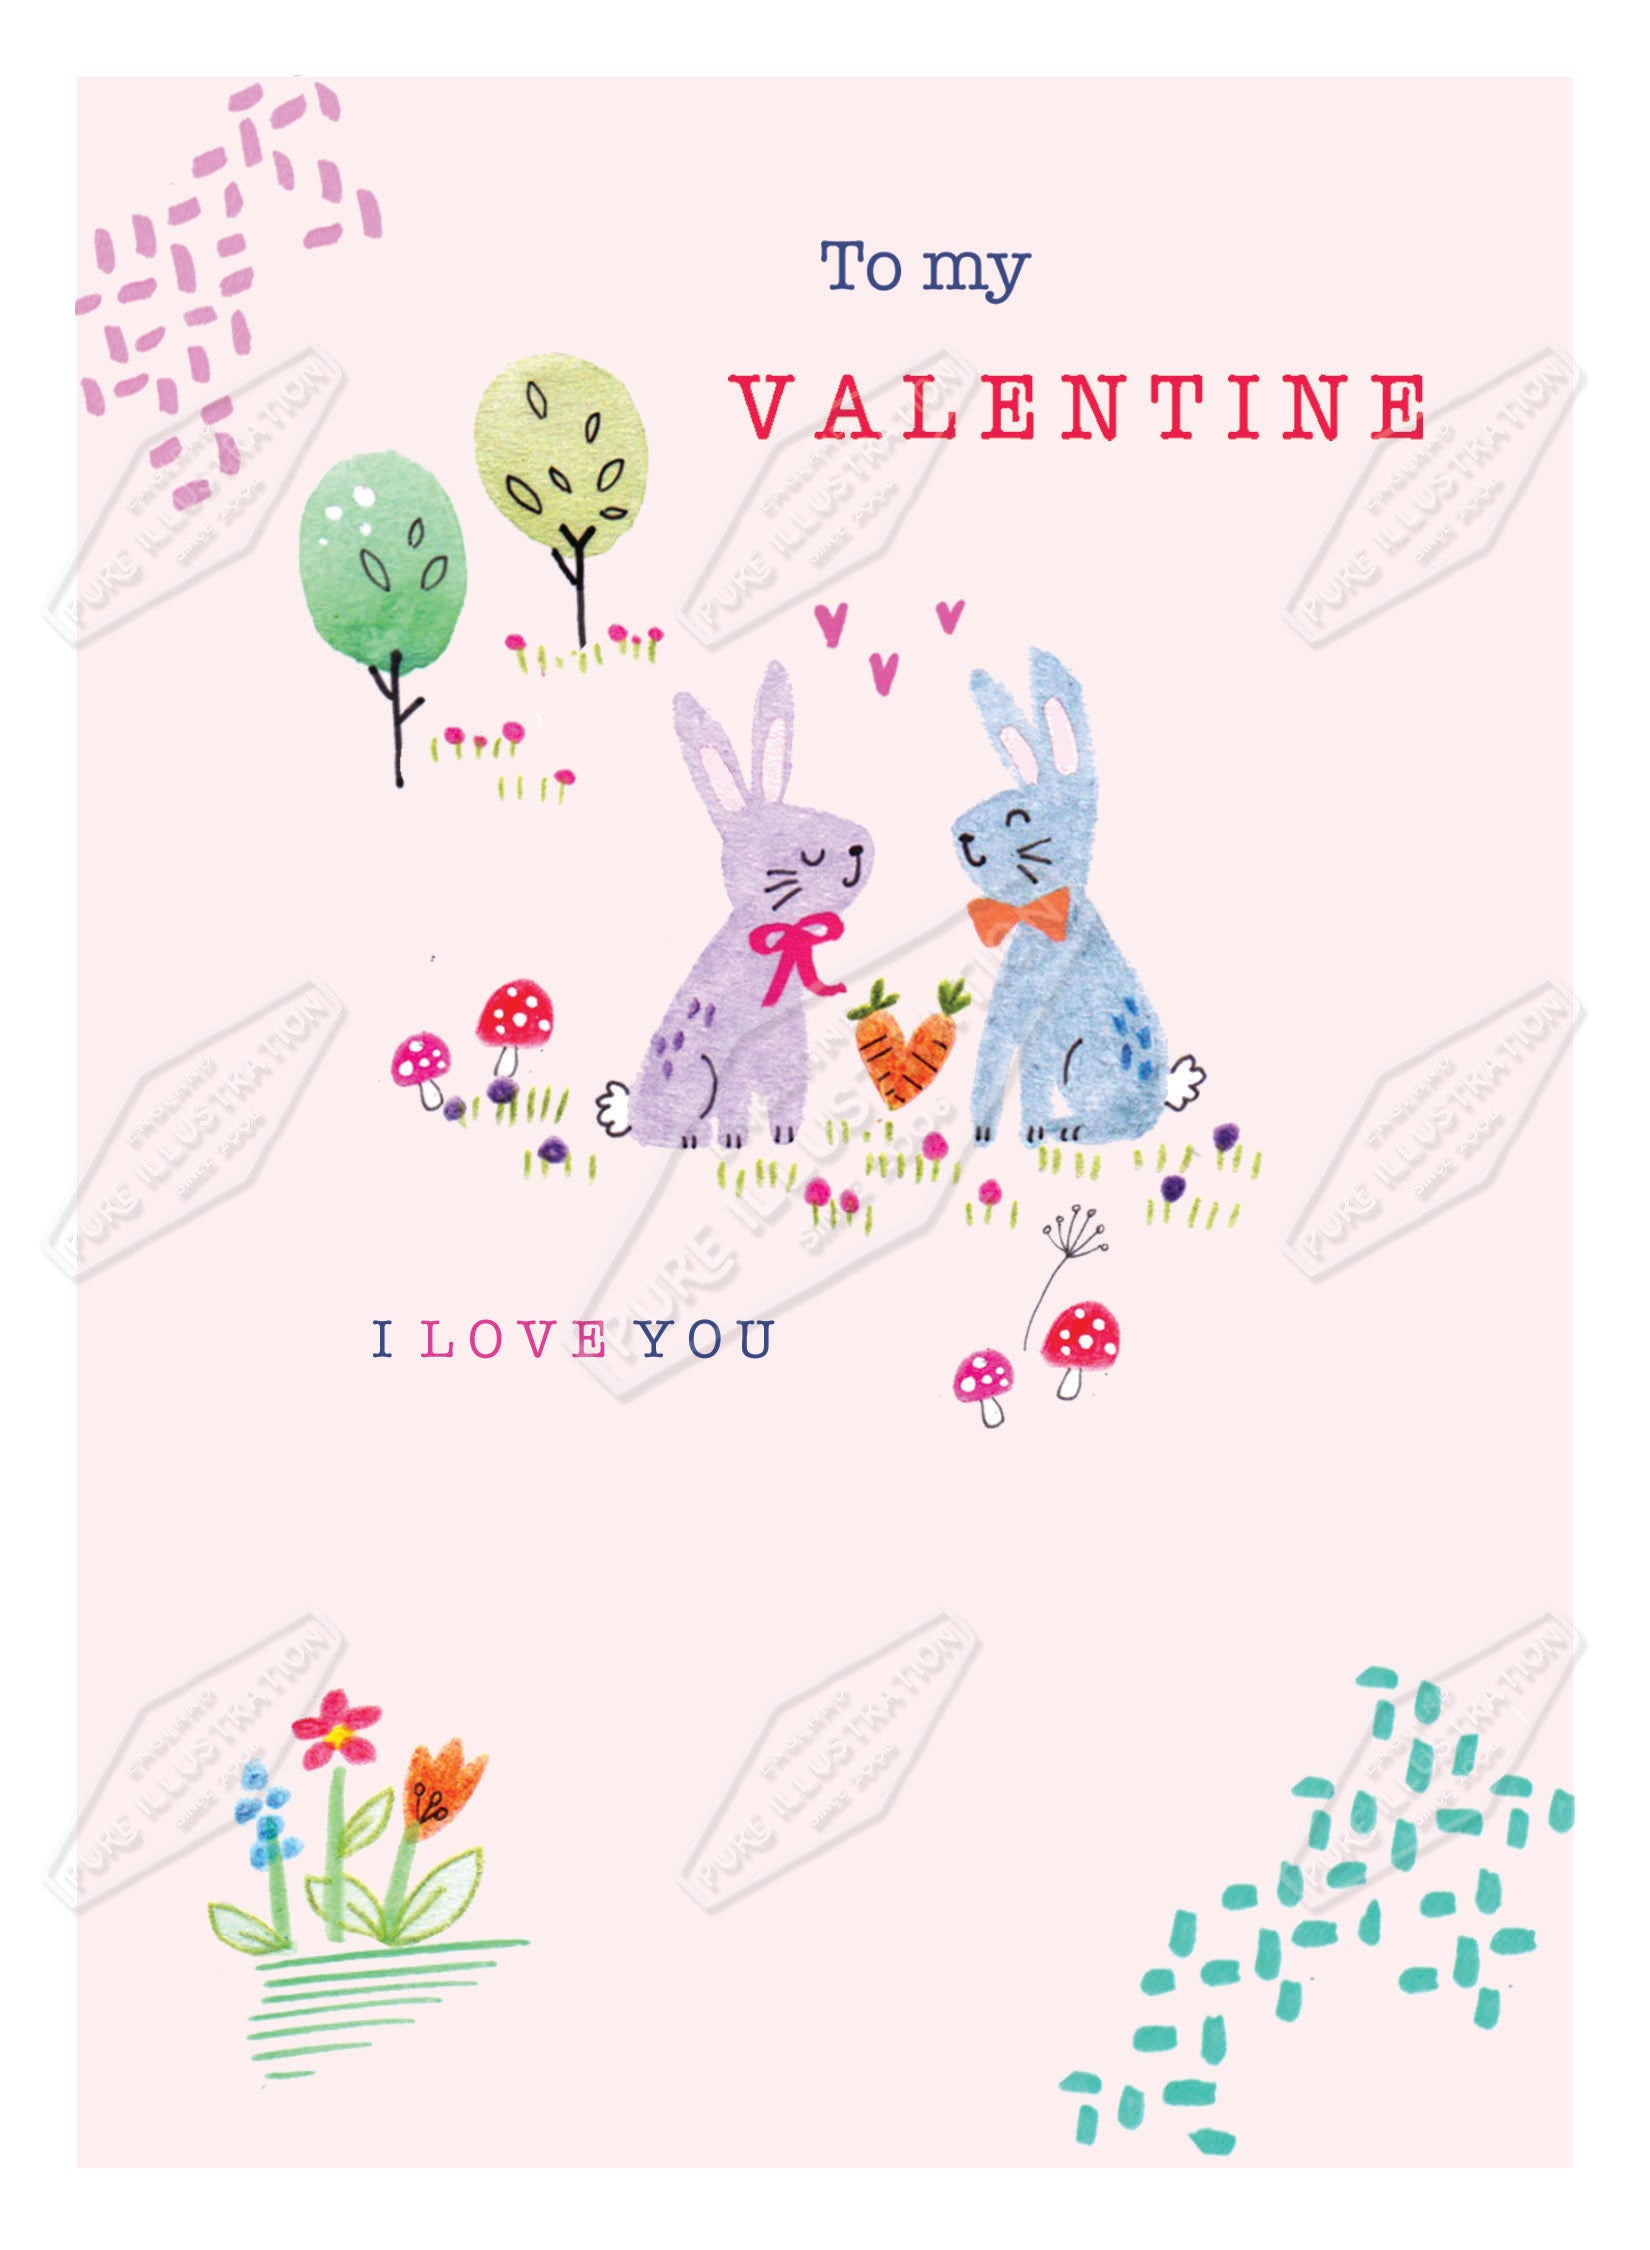 00035745AMA - Ally Marie is represented by Pure Art Licensing Agency - Valentine's Day Greeting Card Design